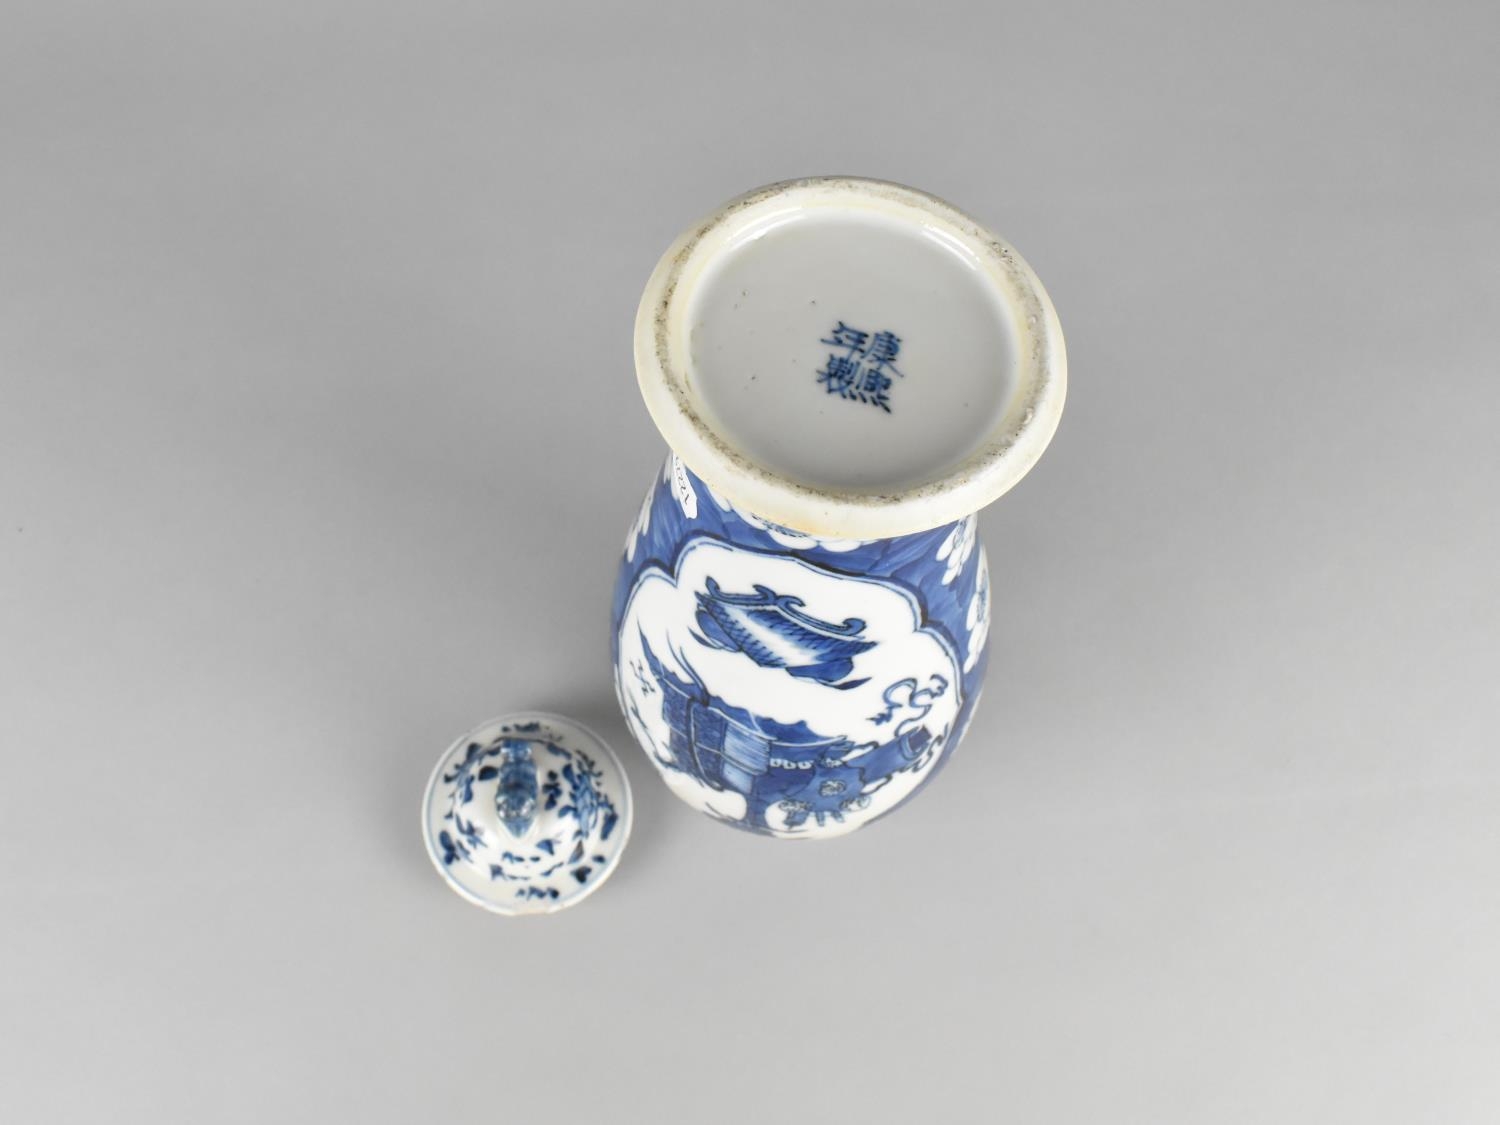 A Chinese Late Qing Dynasty Porcelain Blue and White Baluster Vase Decorated with "Hundred Antiques" - Image 3 of 3